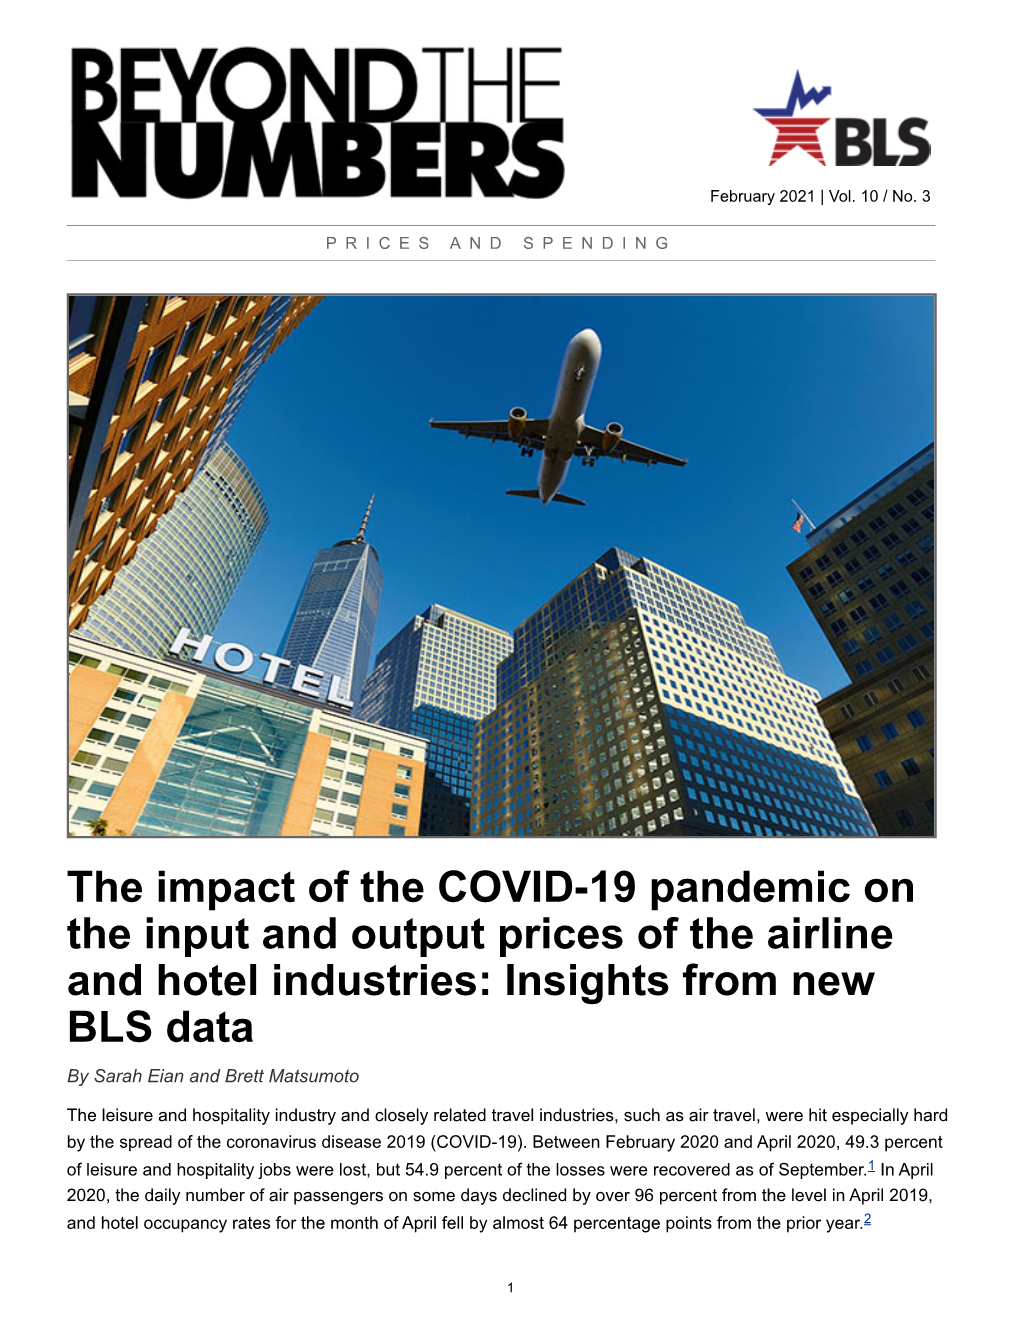 The Impact of the COVID-19 Pandemic on the Input and Output Prices of the Airline and Hotel Industries: Insights from New BLS Data by Sarah Eian and Brett Matsumoto